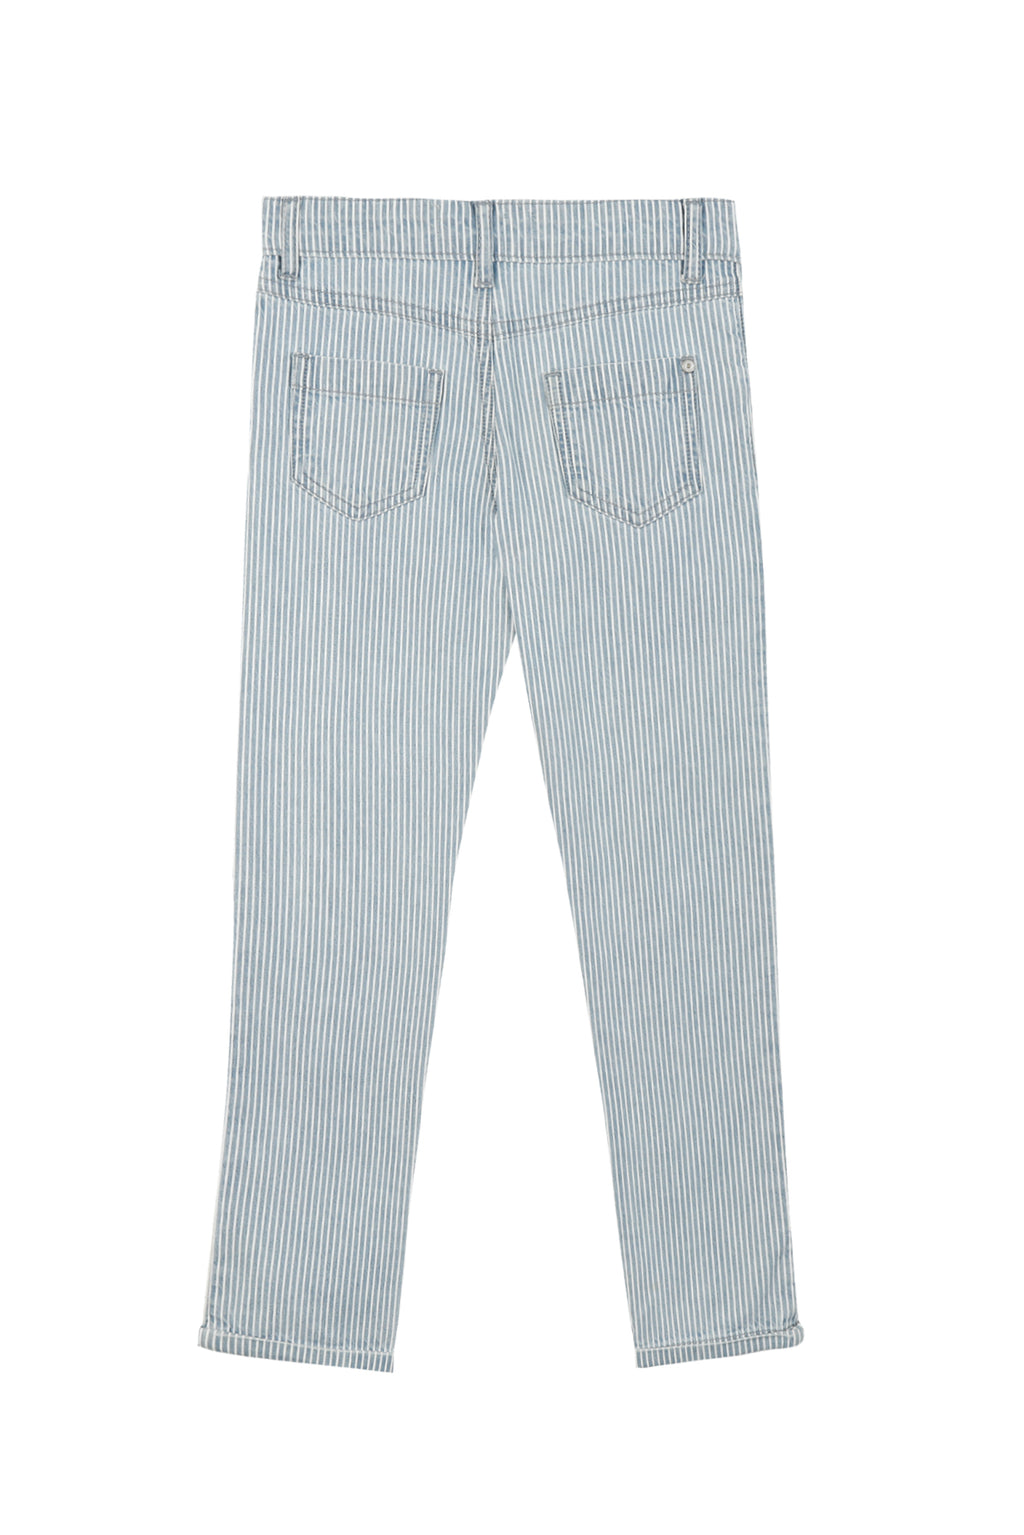 Trousers - Blue striped